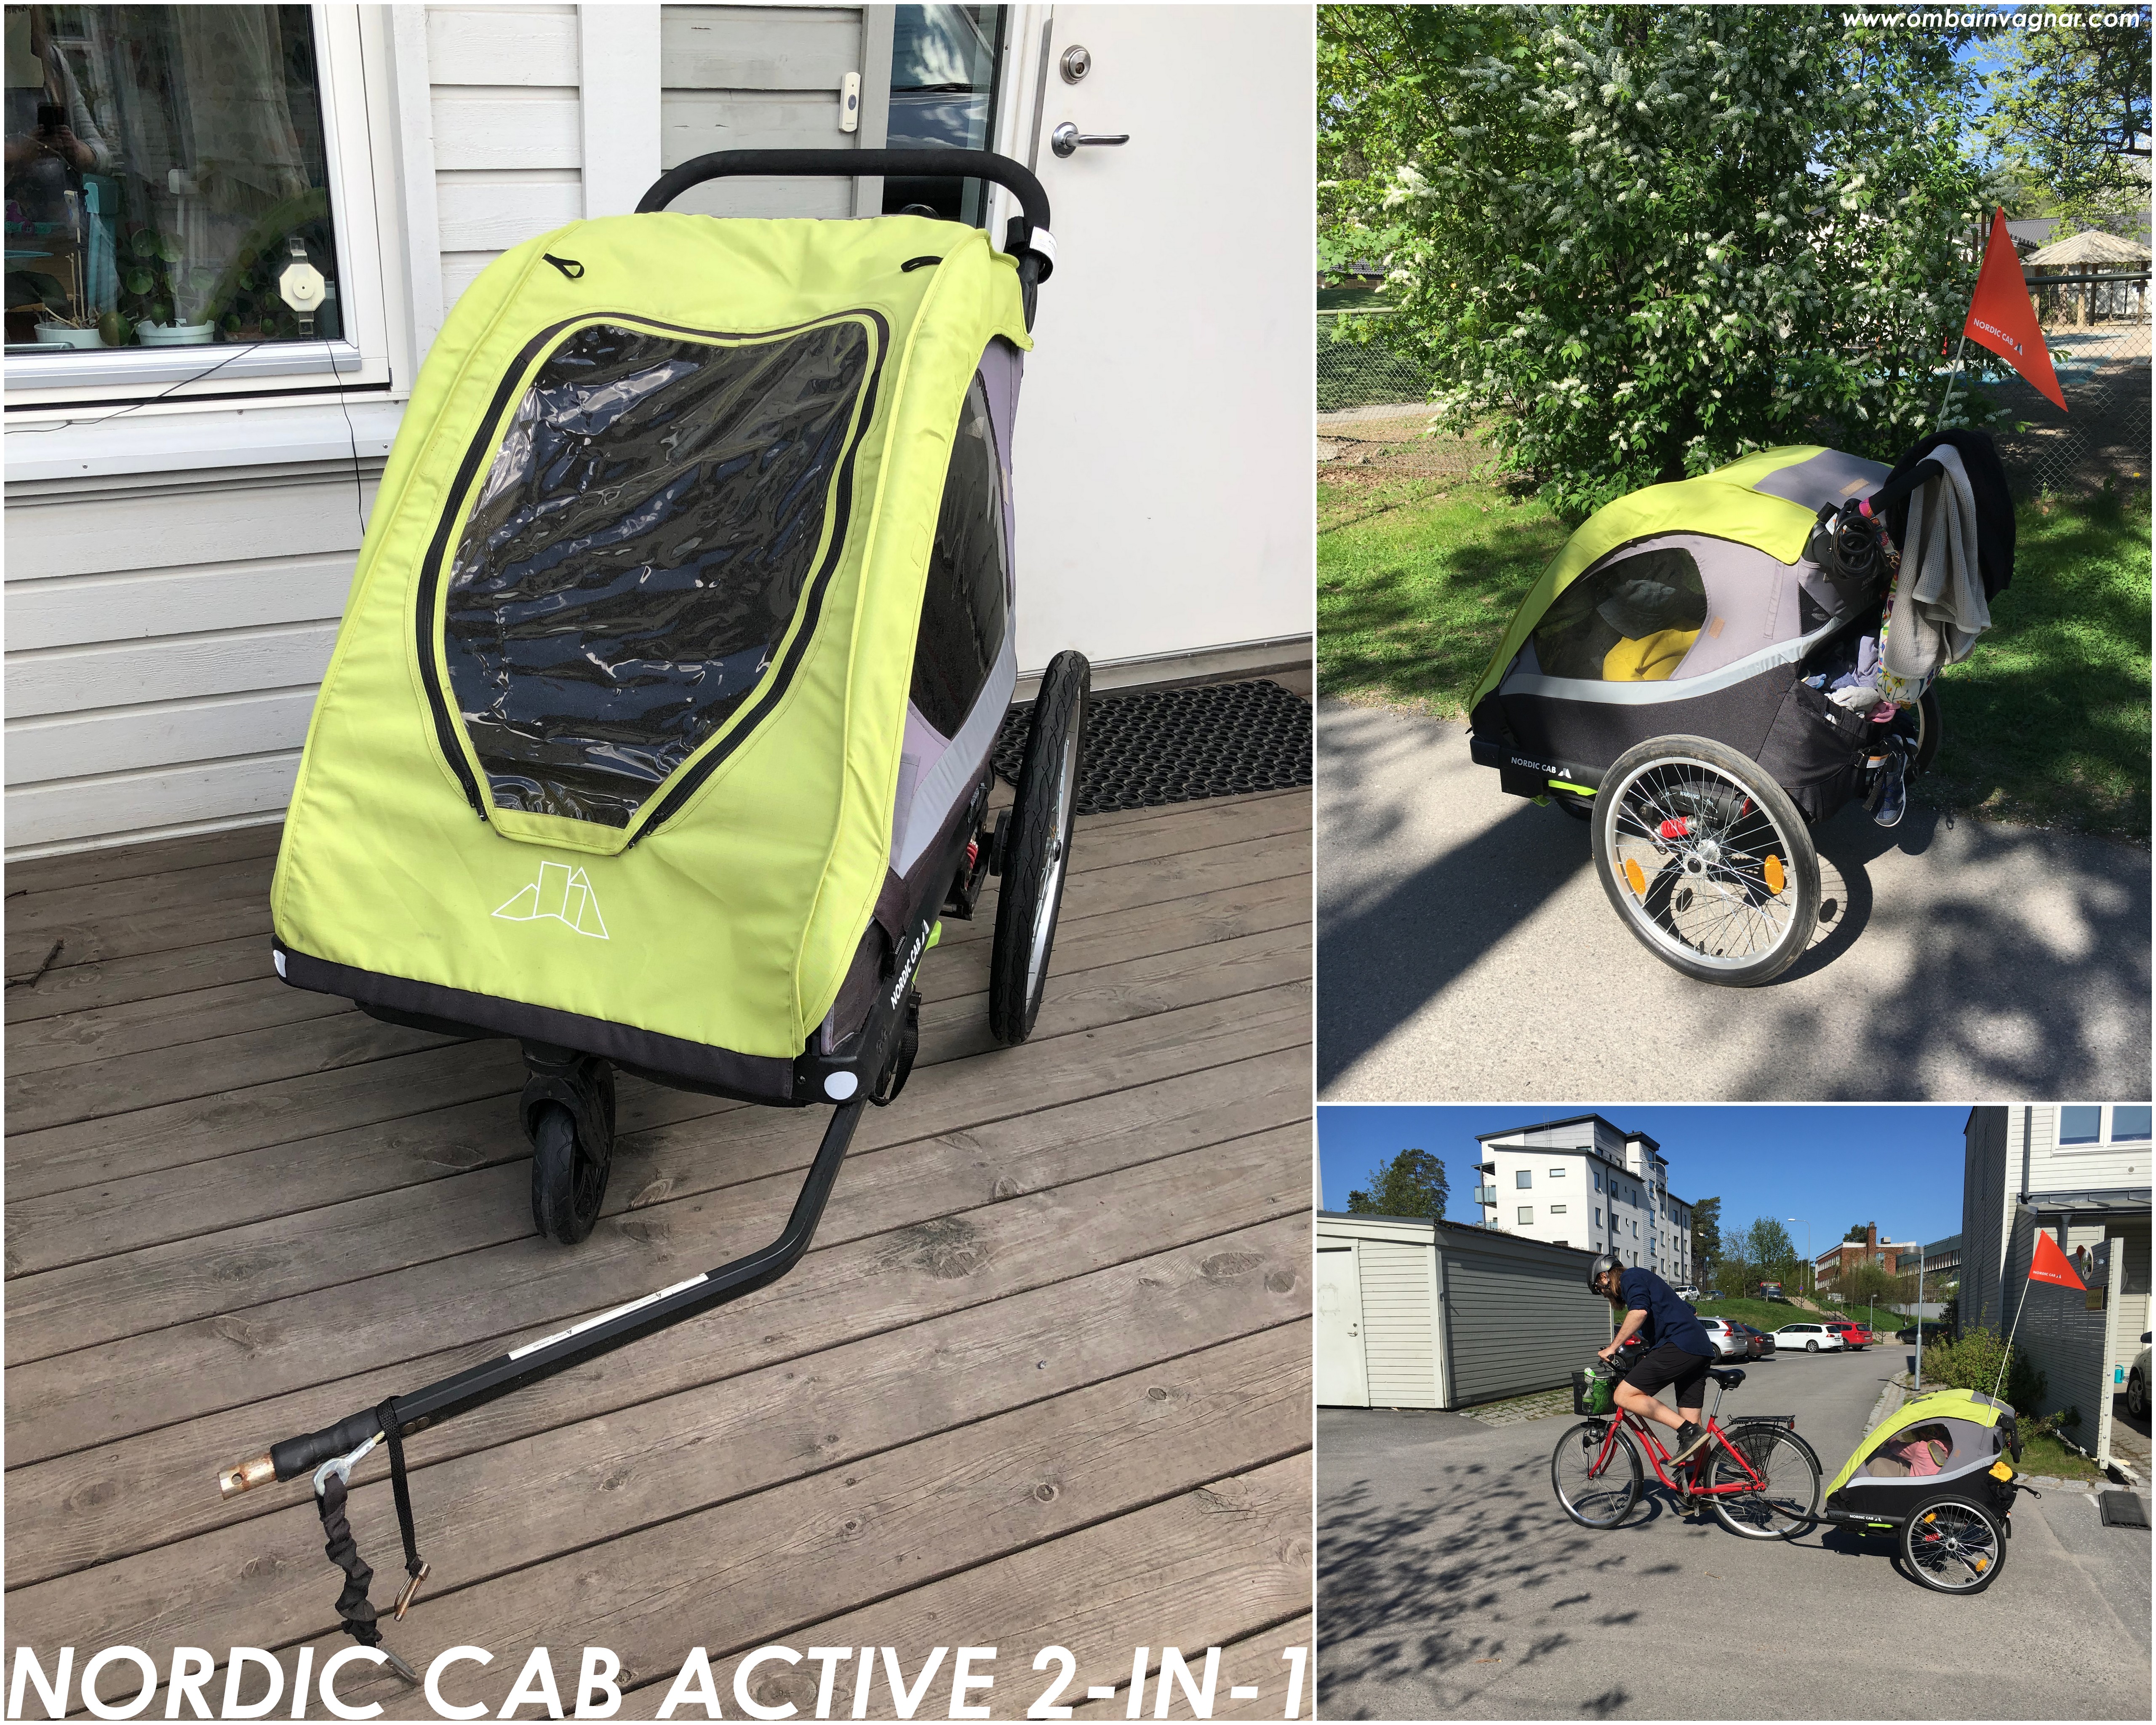 Nordic Cab Active 2-in-1 Cykelvagn recension